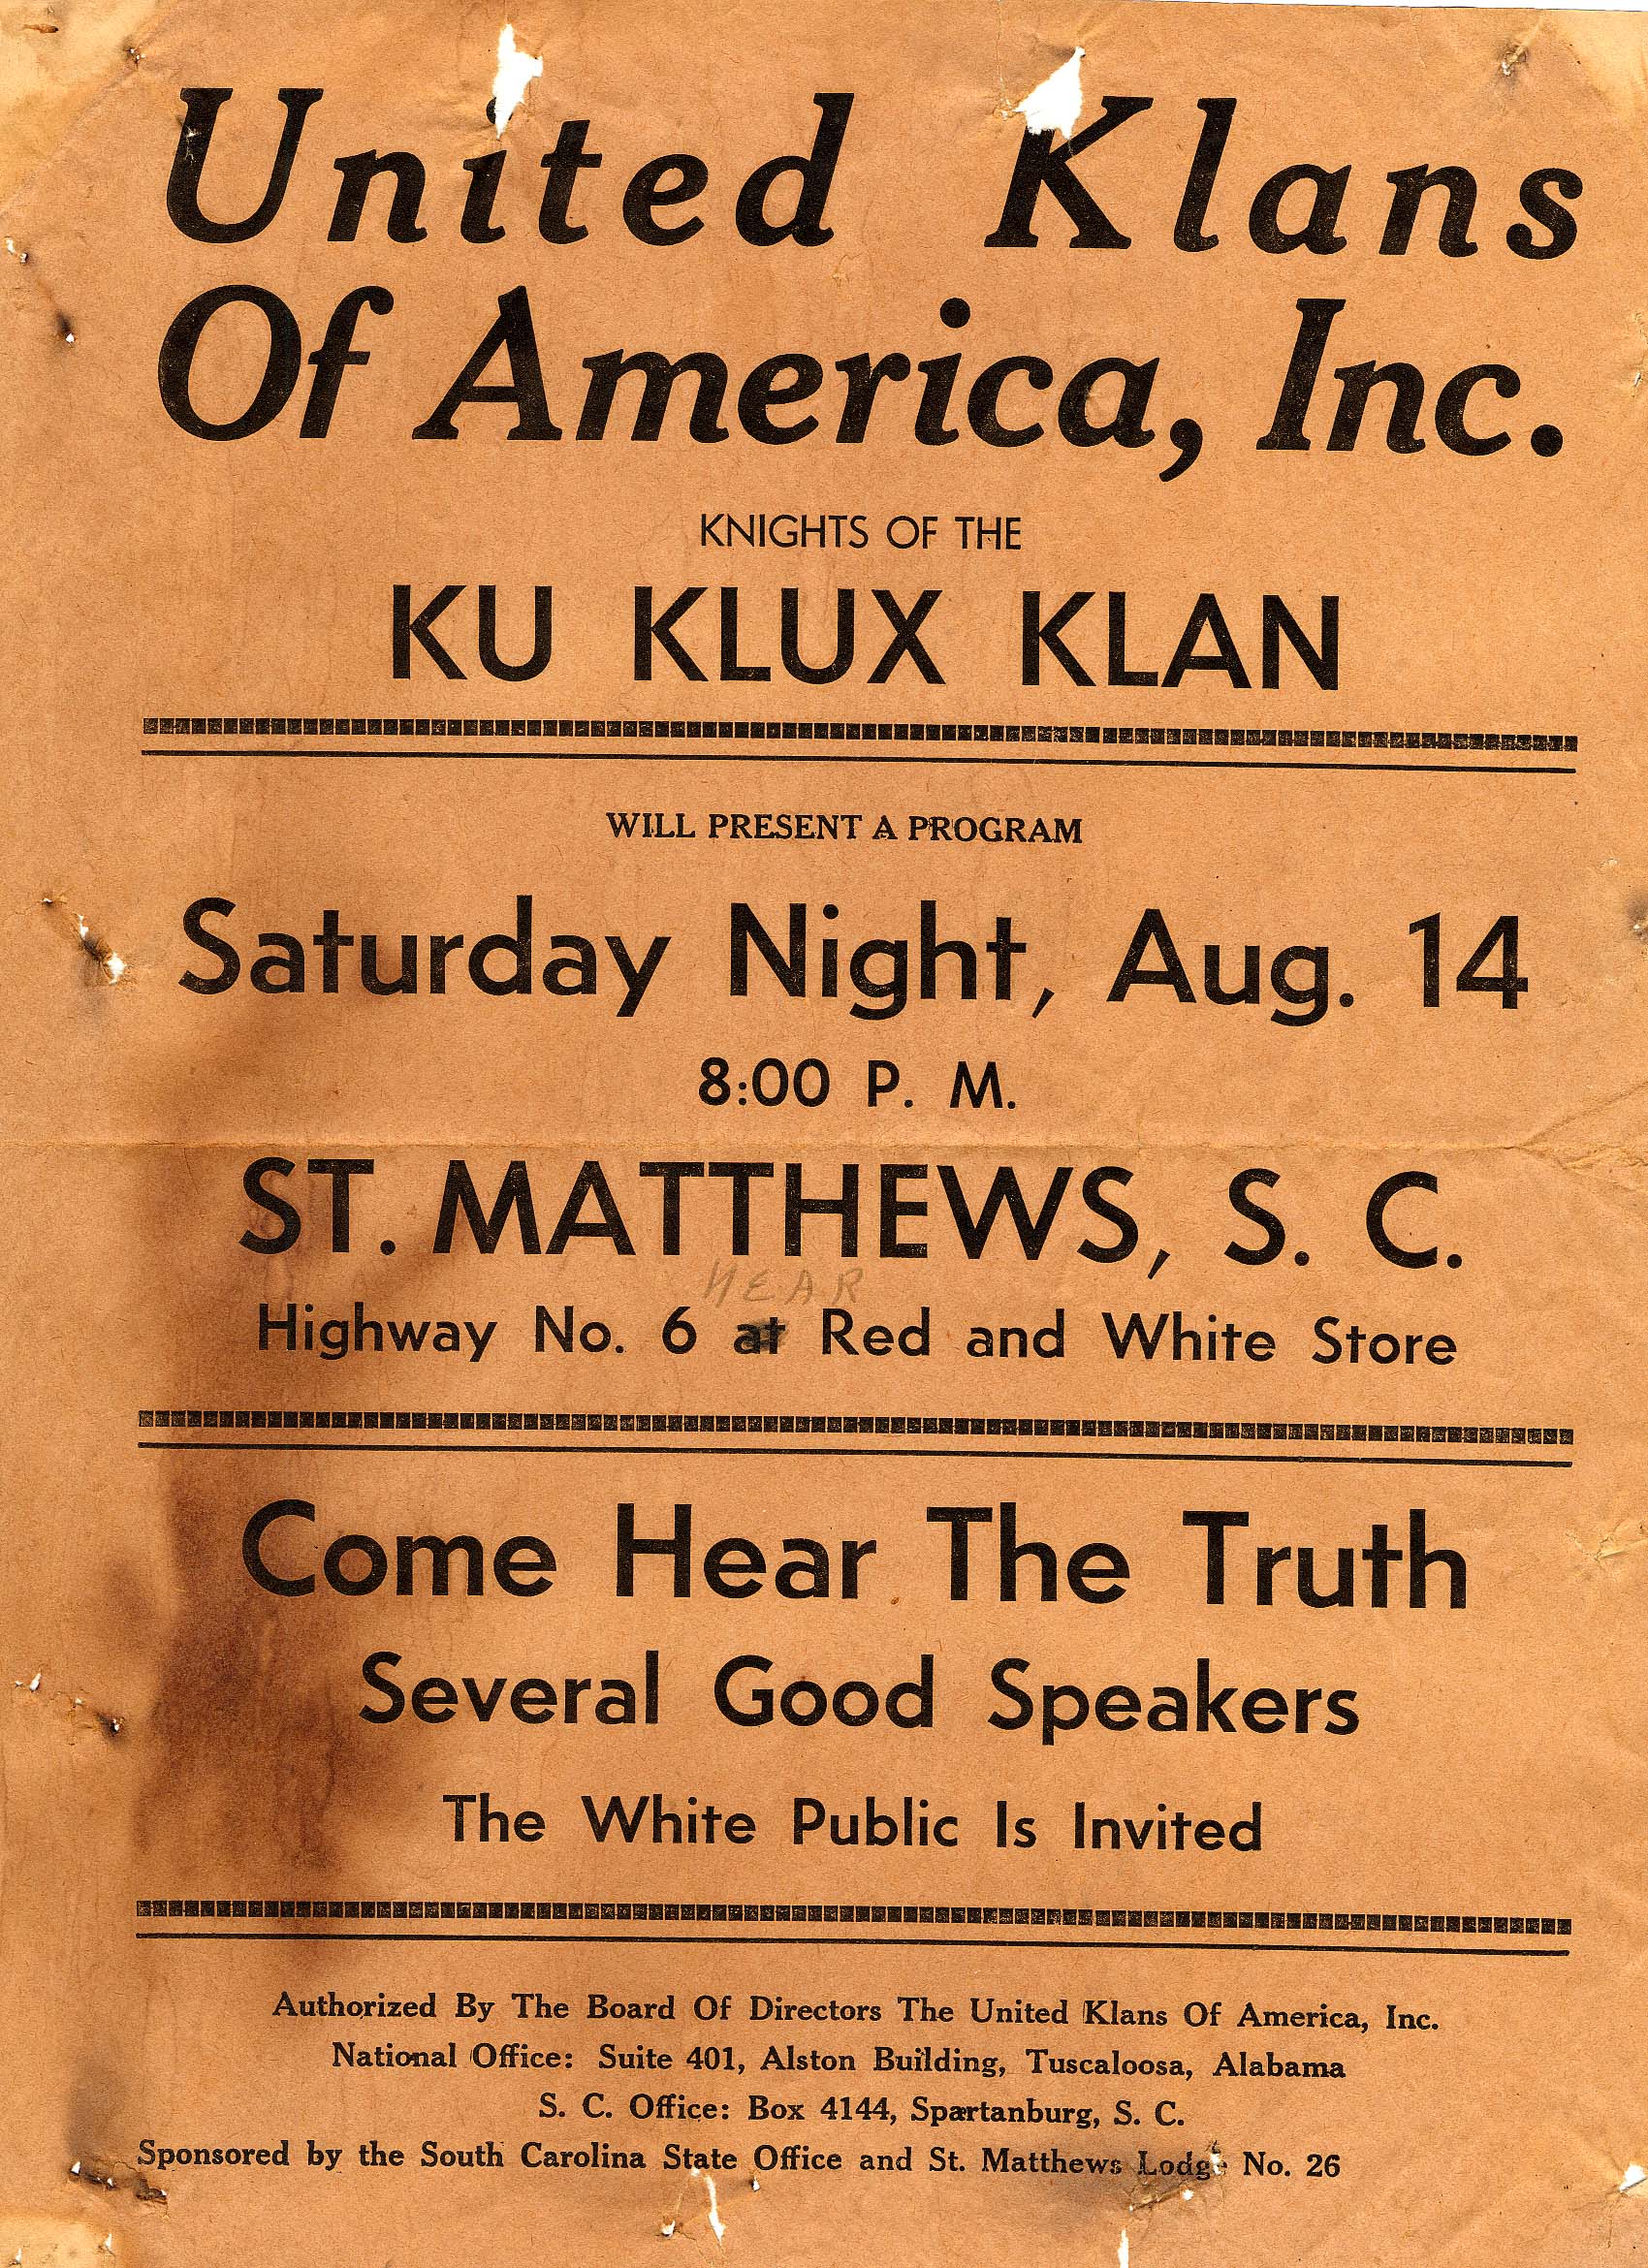 Ku Klux Klan pamphlet announcing an event open to the white public.